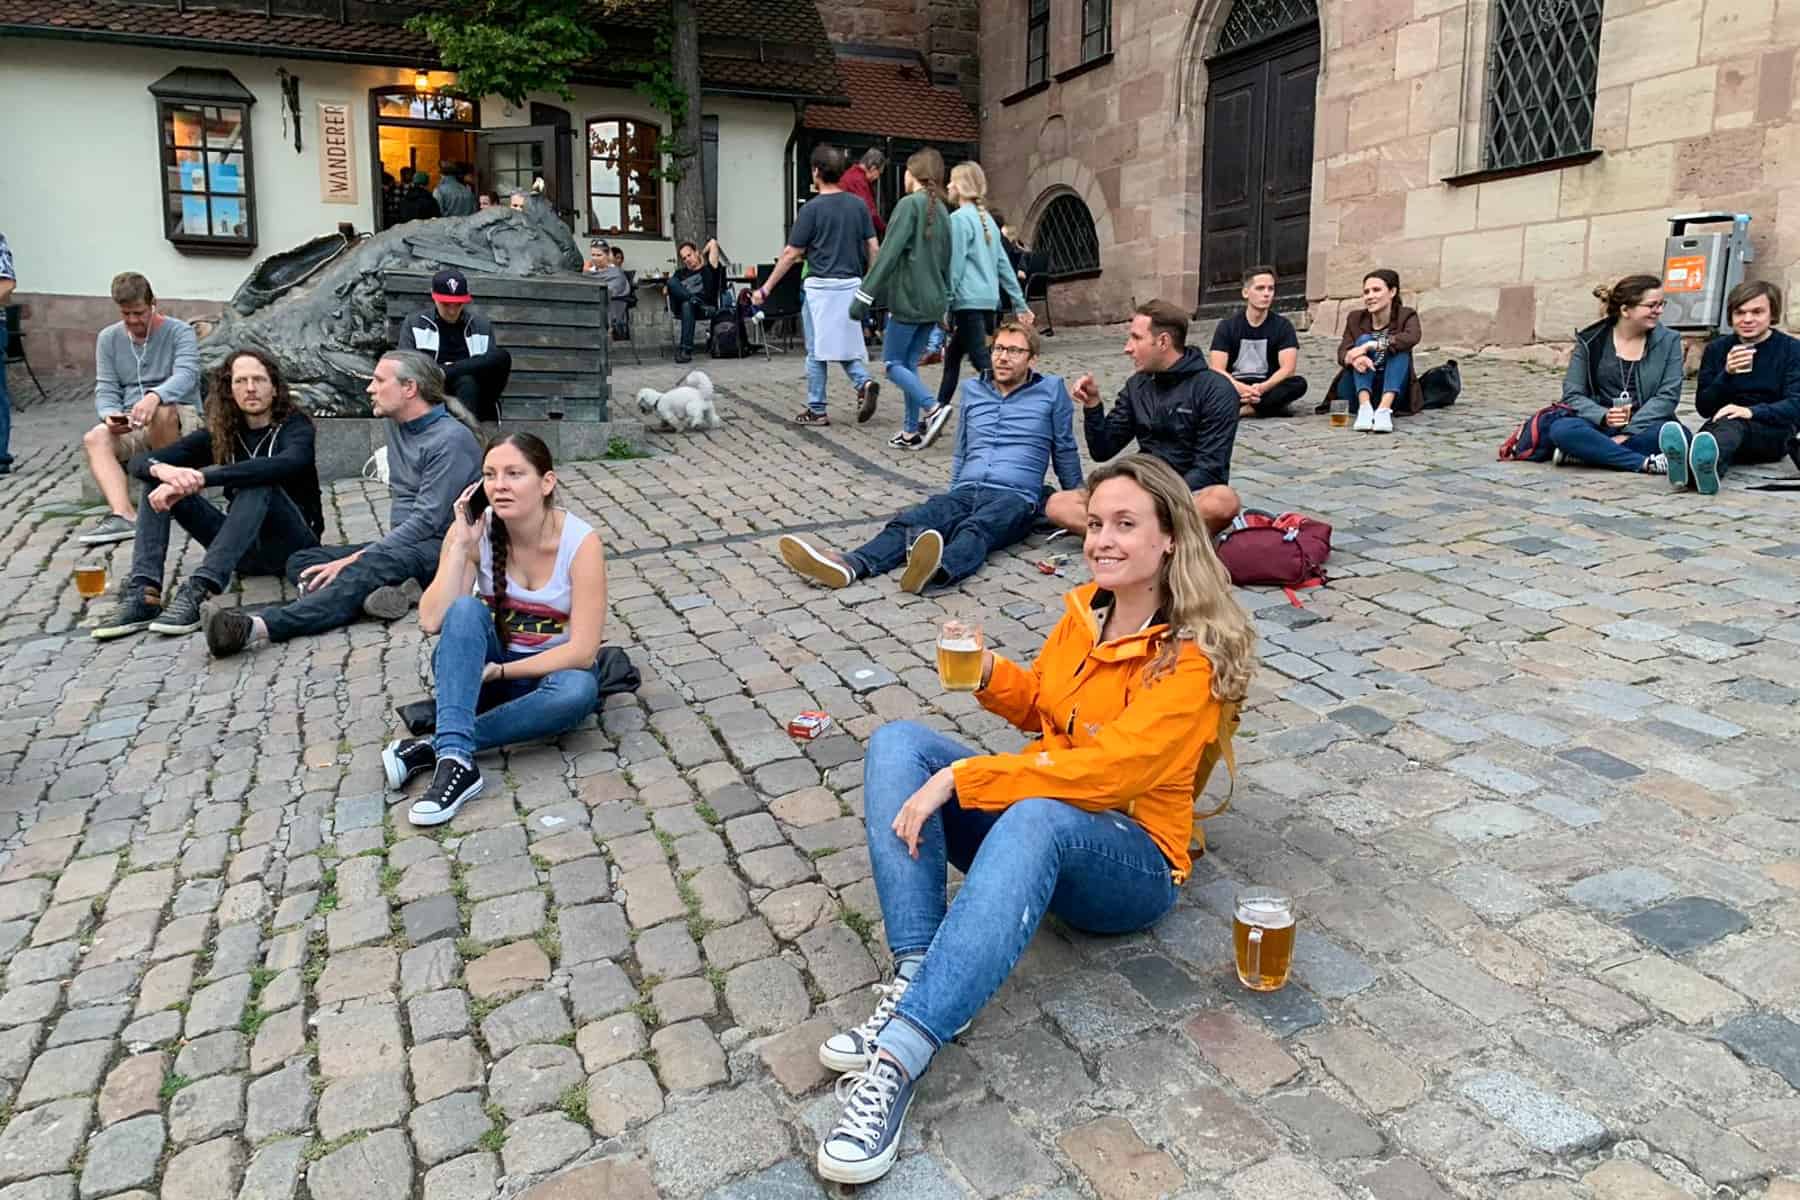 A woman in an orange jacket and jeans drinks a large beer while sitting on the cobblestoned streets of Nuremberg Old Town